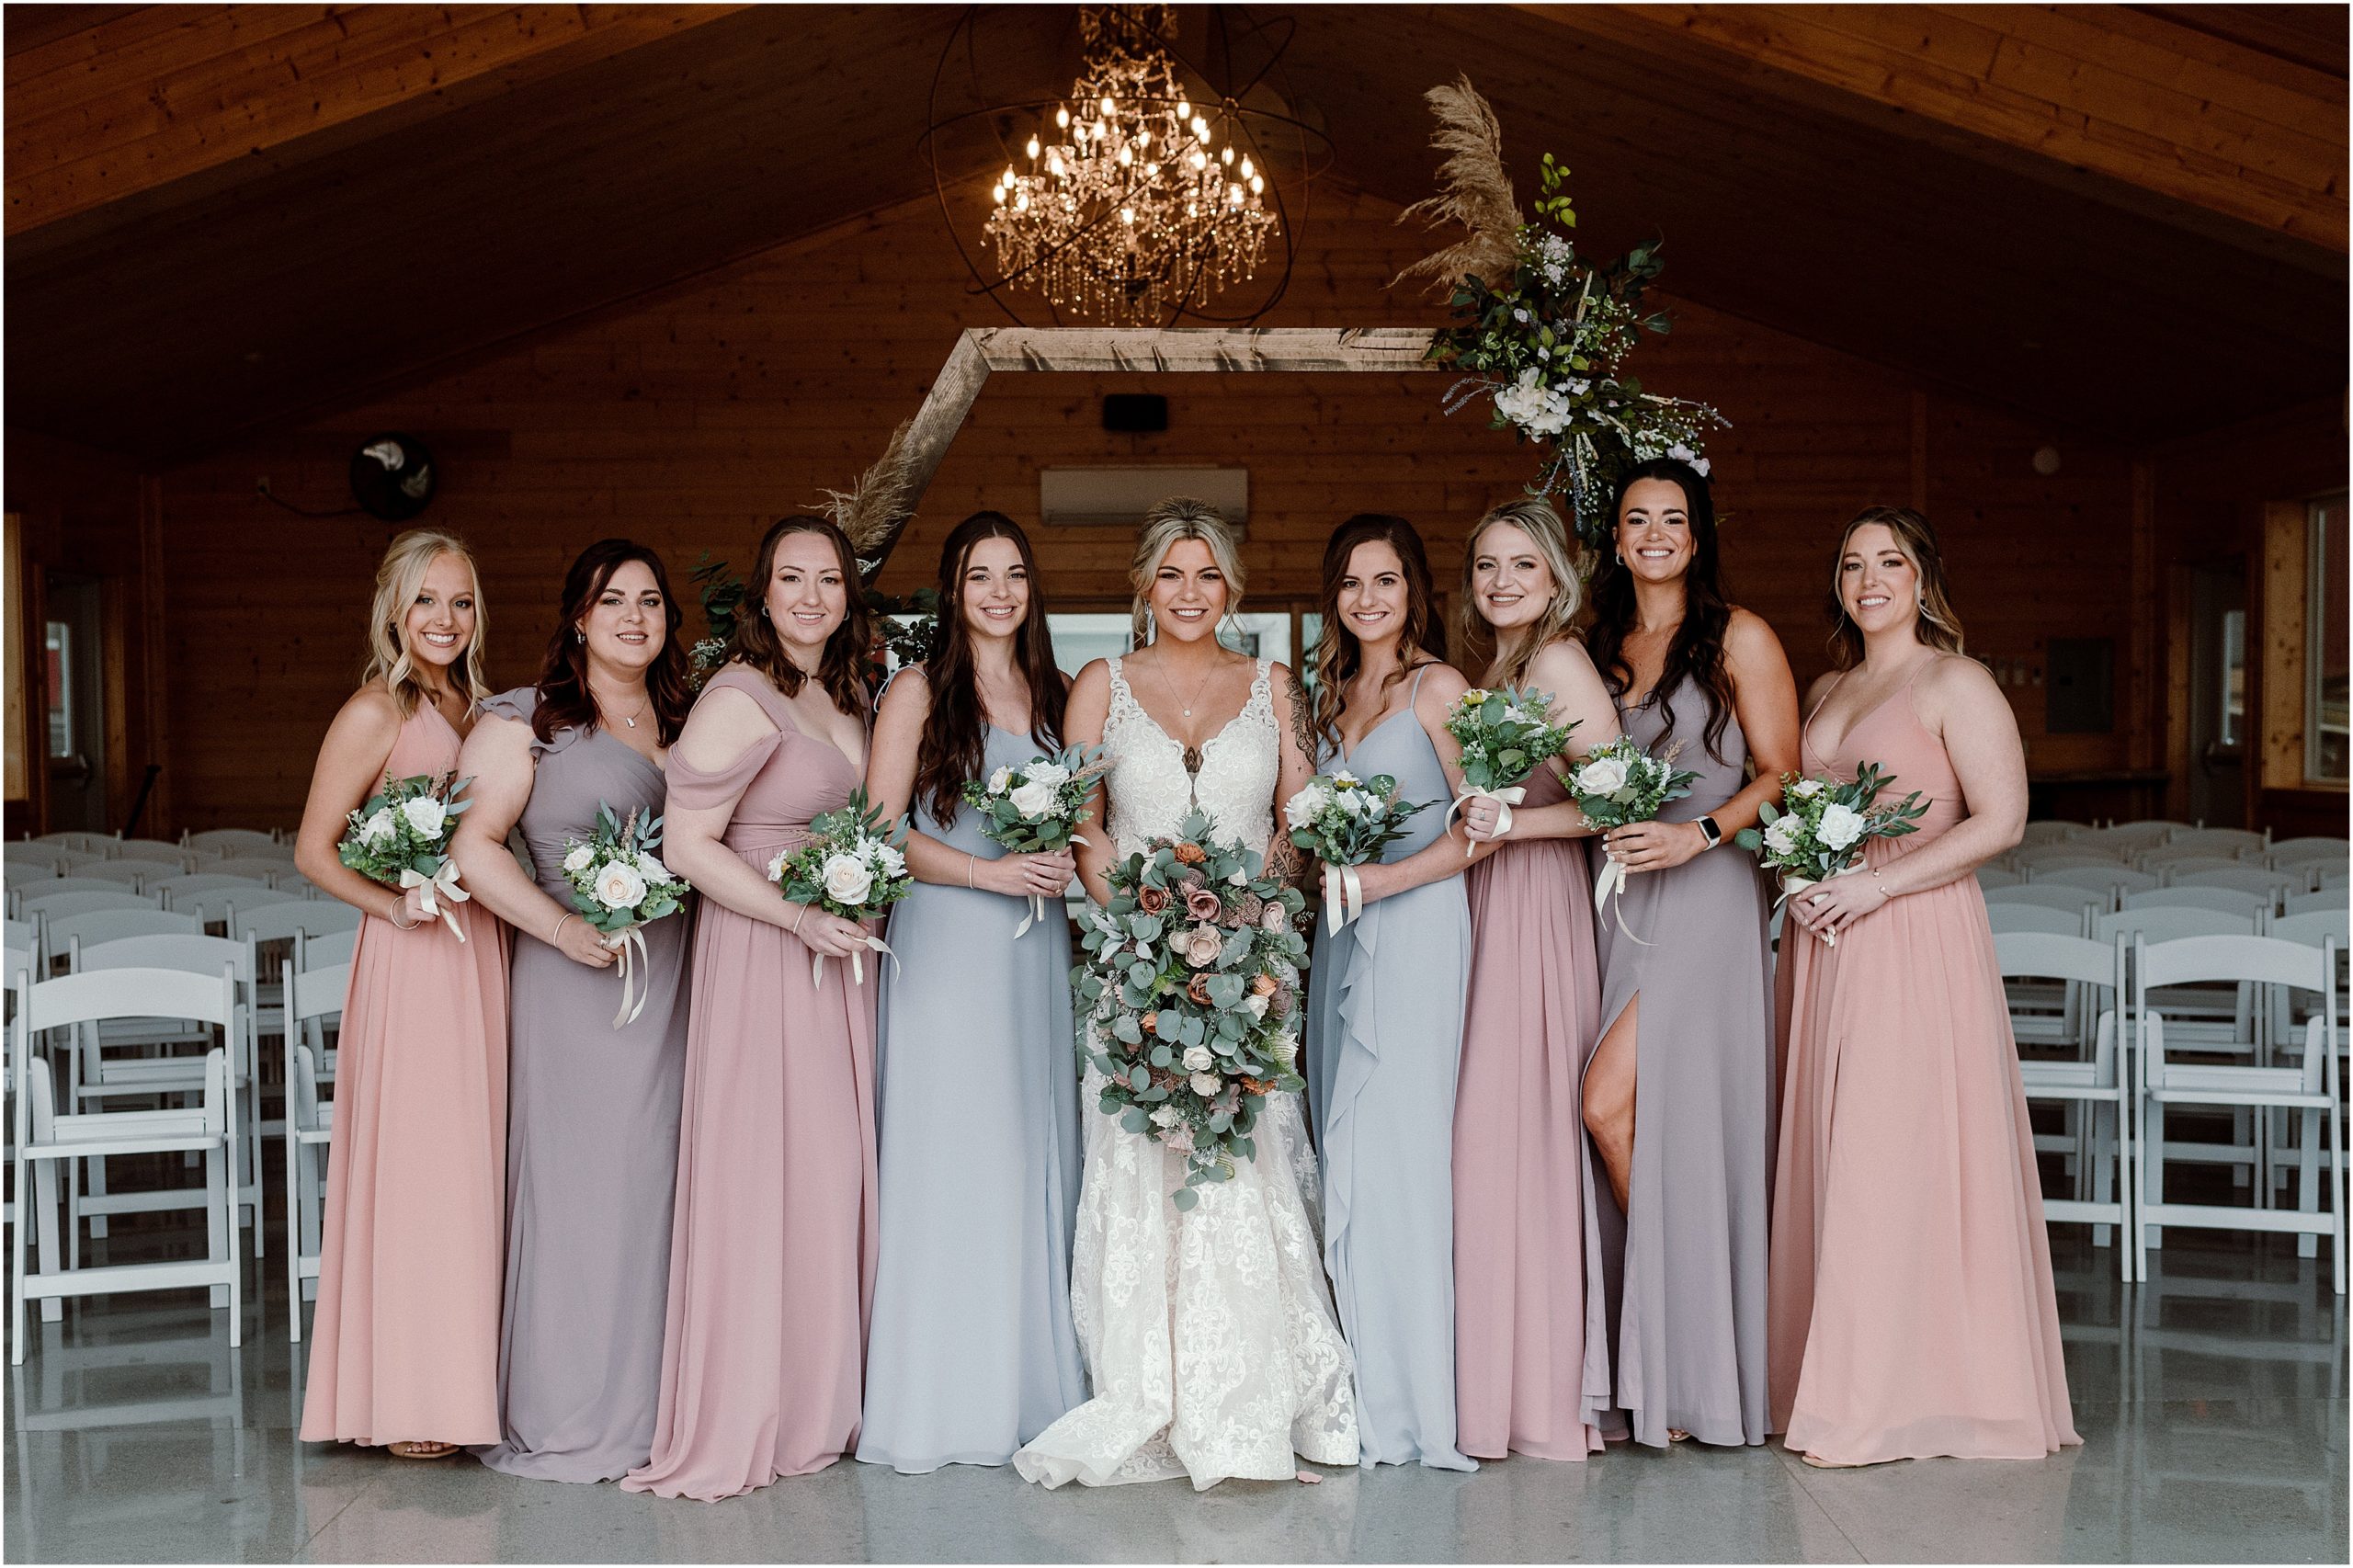 Bride and Bridesmaids smile at the camera. Bridesmaids are in spring colors of light pink, lavender, blue, and peach and holding white and green wedding bouquets at the Sparks Barn in Louisville NE by Anna Brace, who specializes in Omaha NE wedding photography.